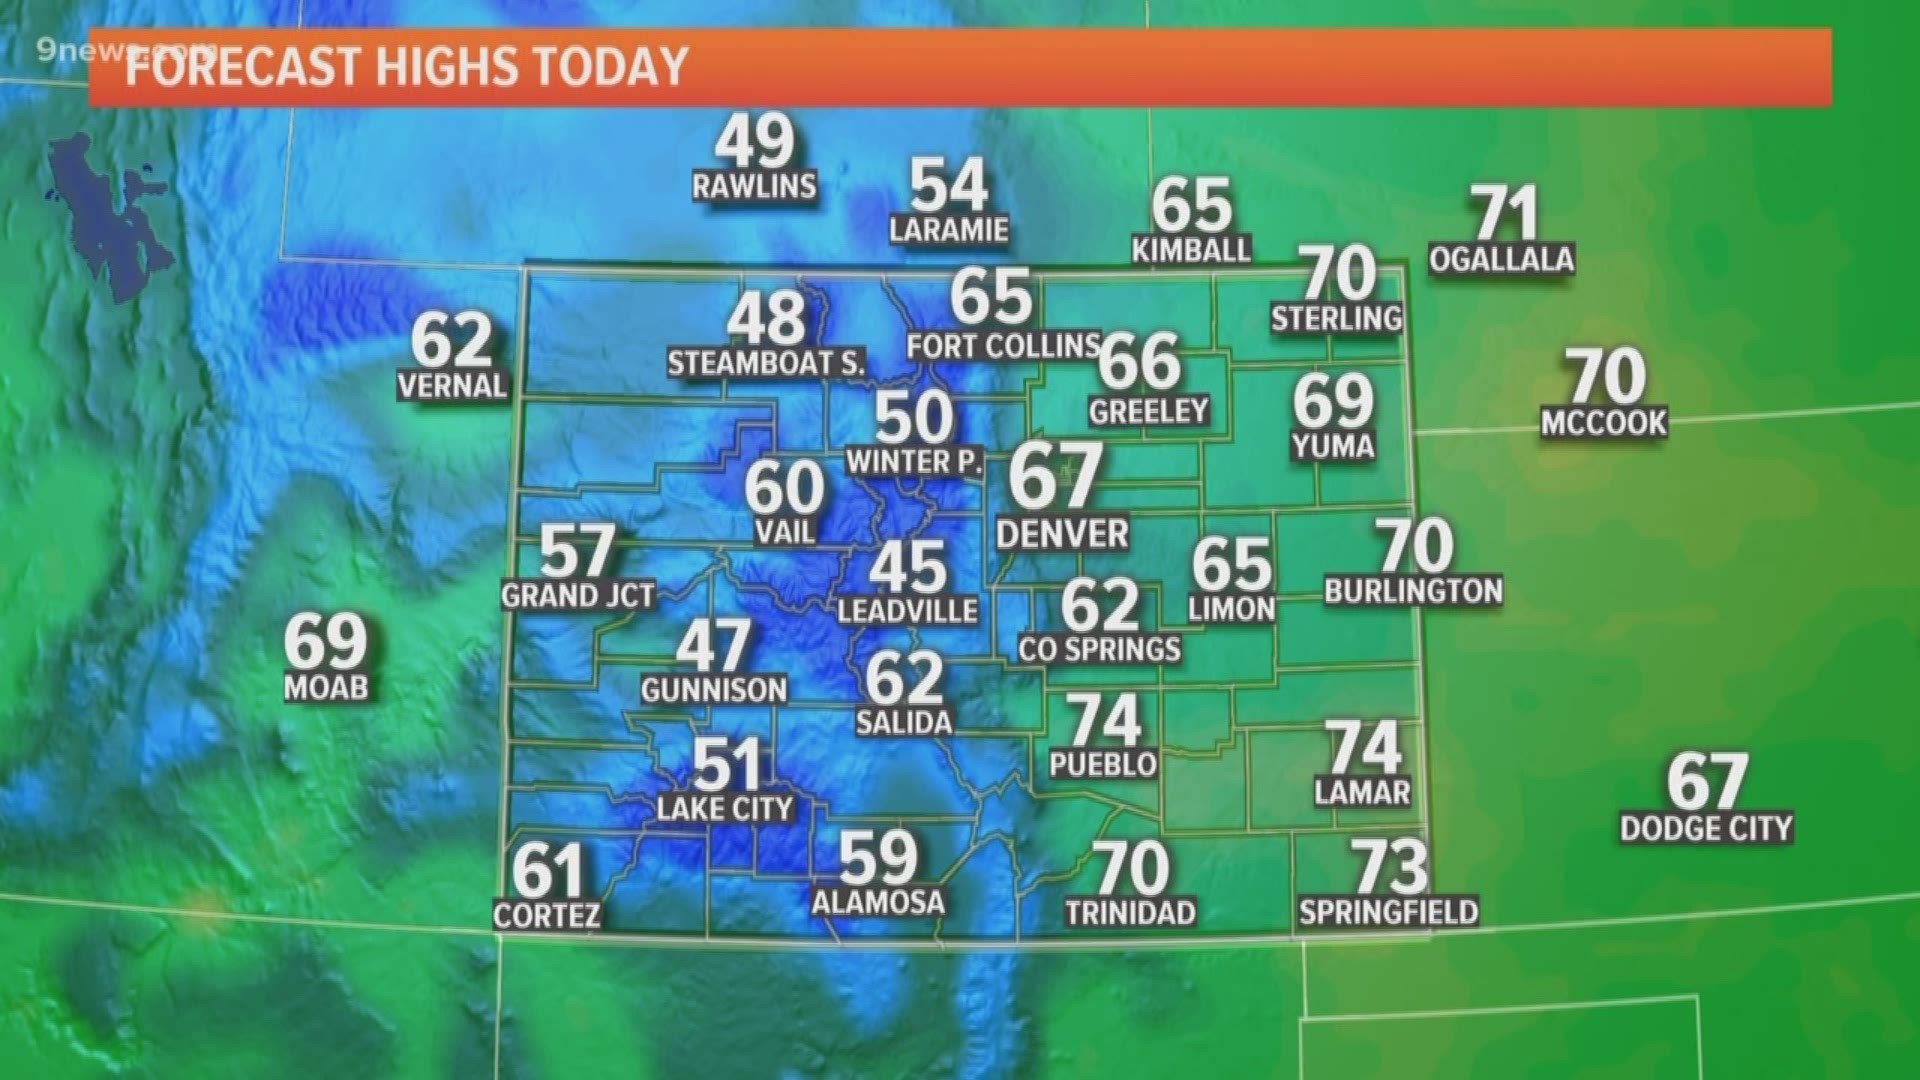 Becky Ditchfield has your Tuesday afternoon forecast.